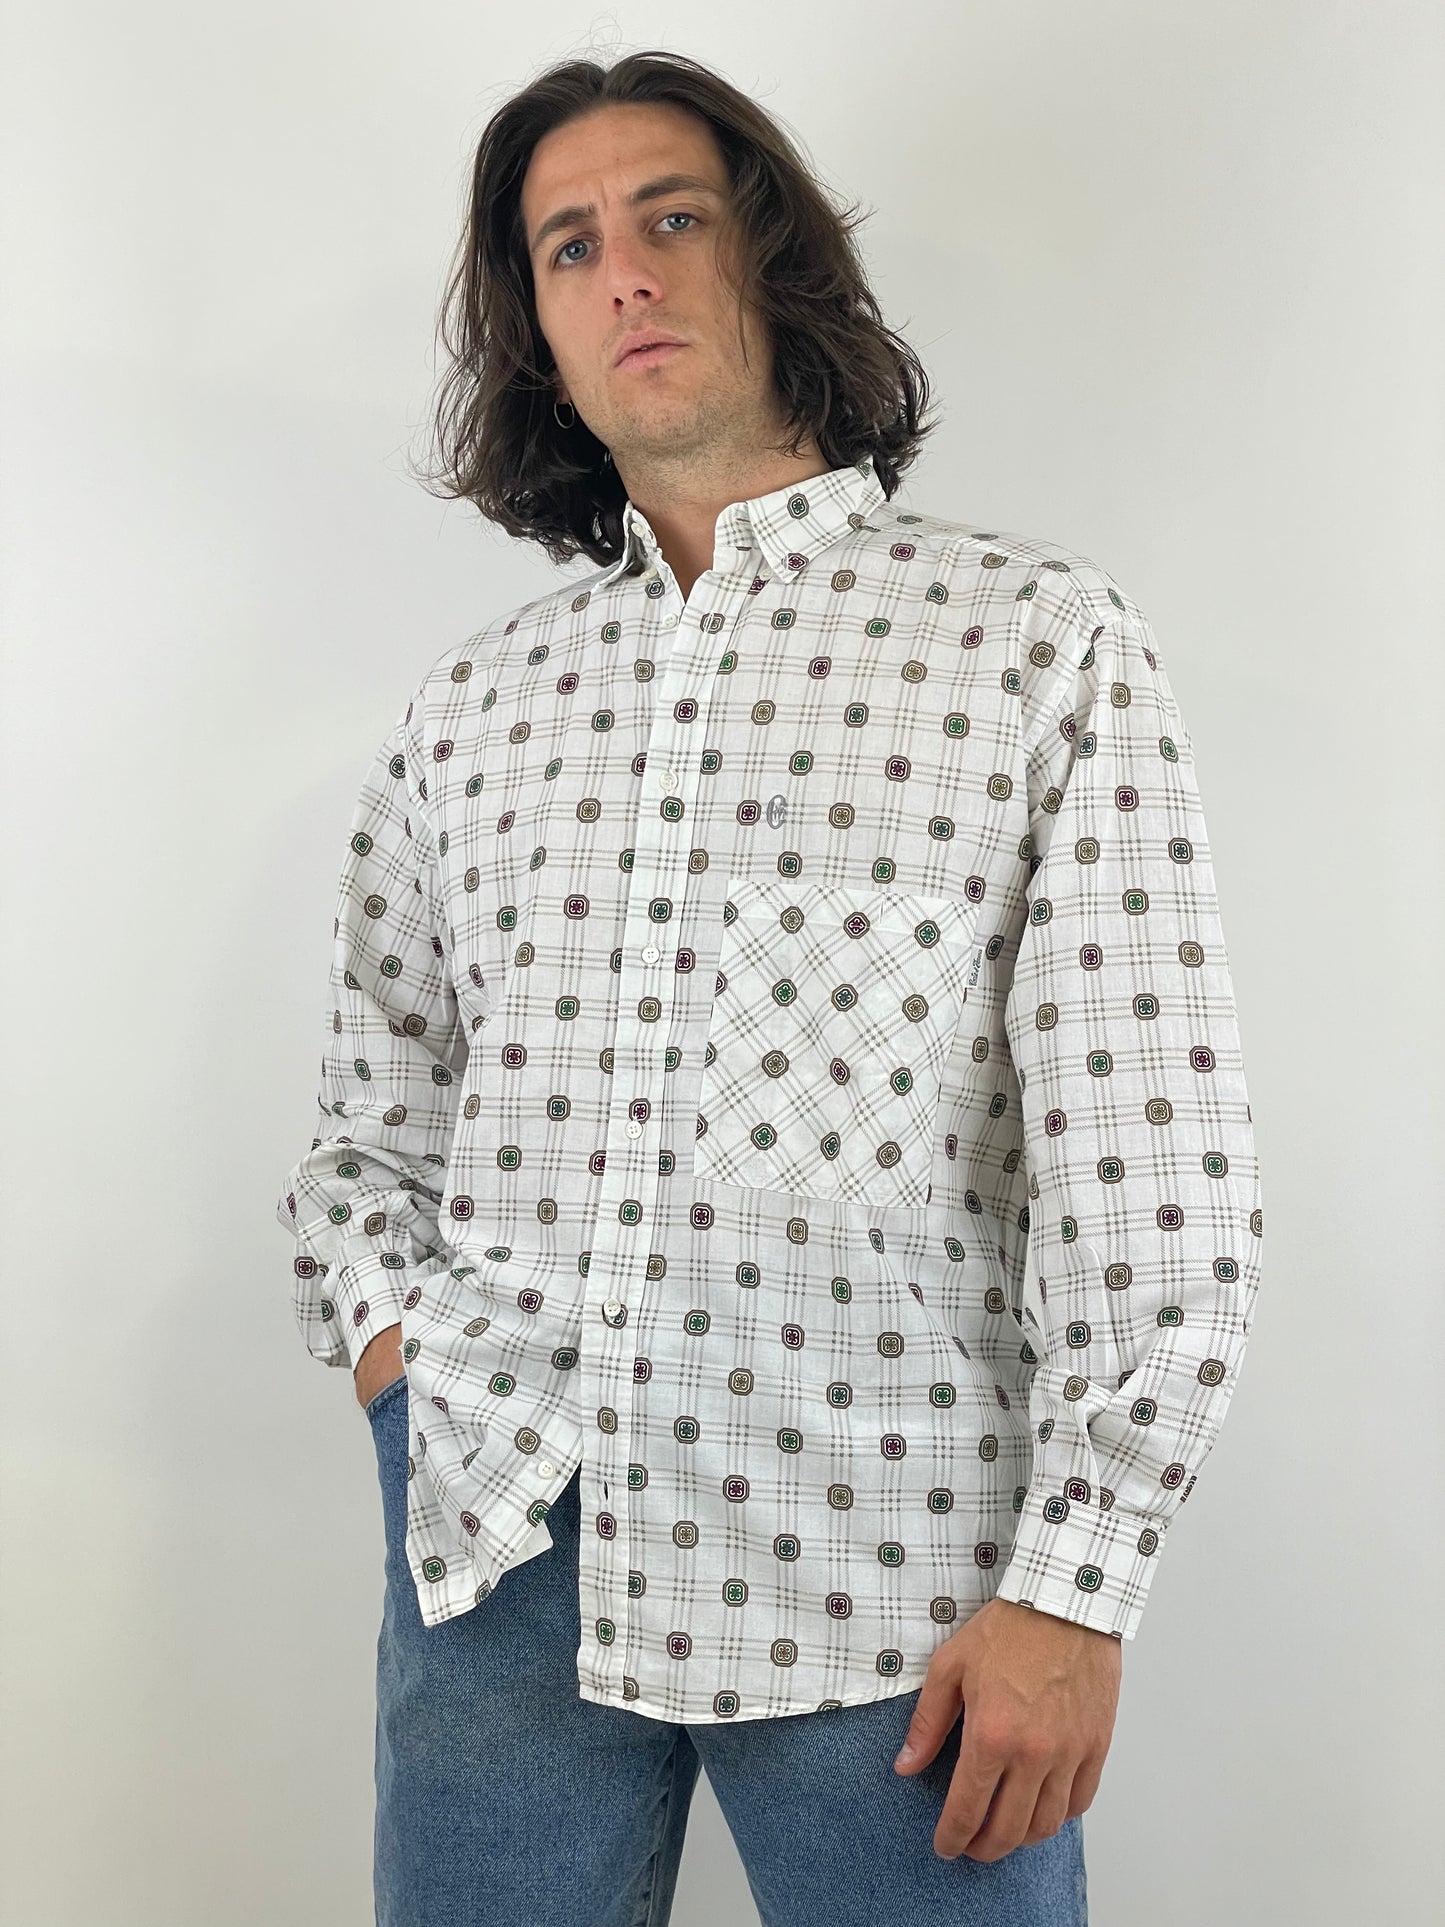 Conte of Florence shirt